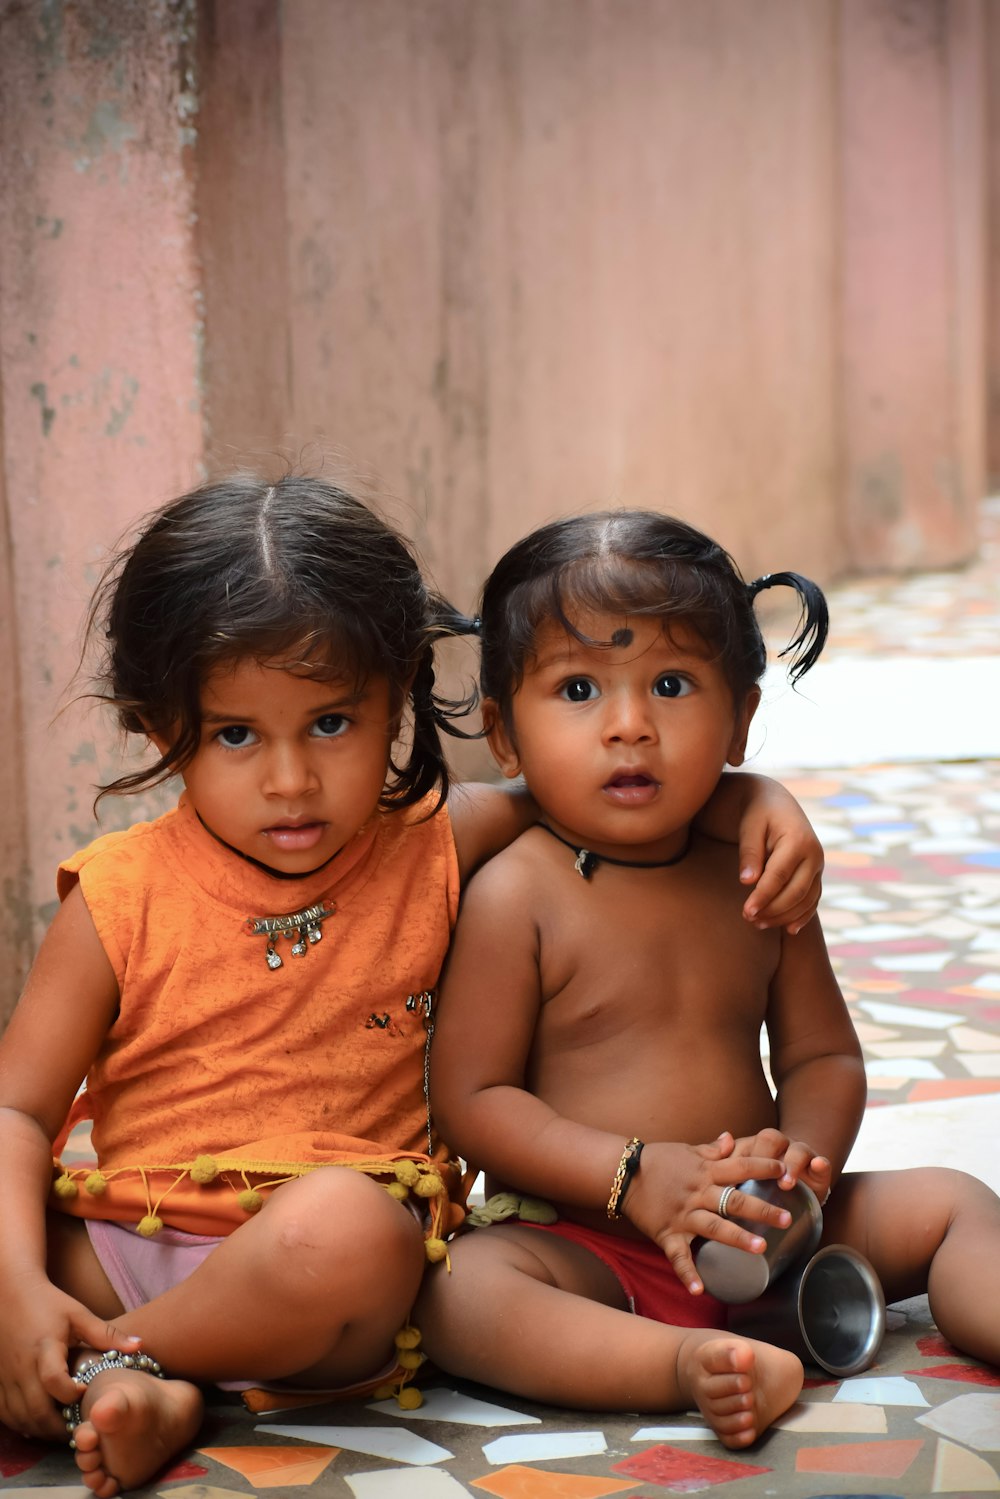 two young children sitting on the ground next to each other